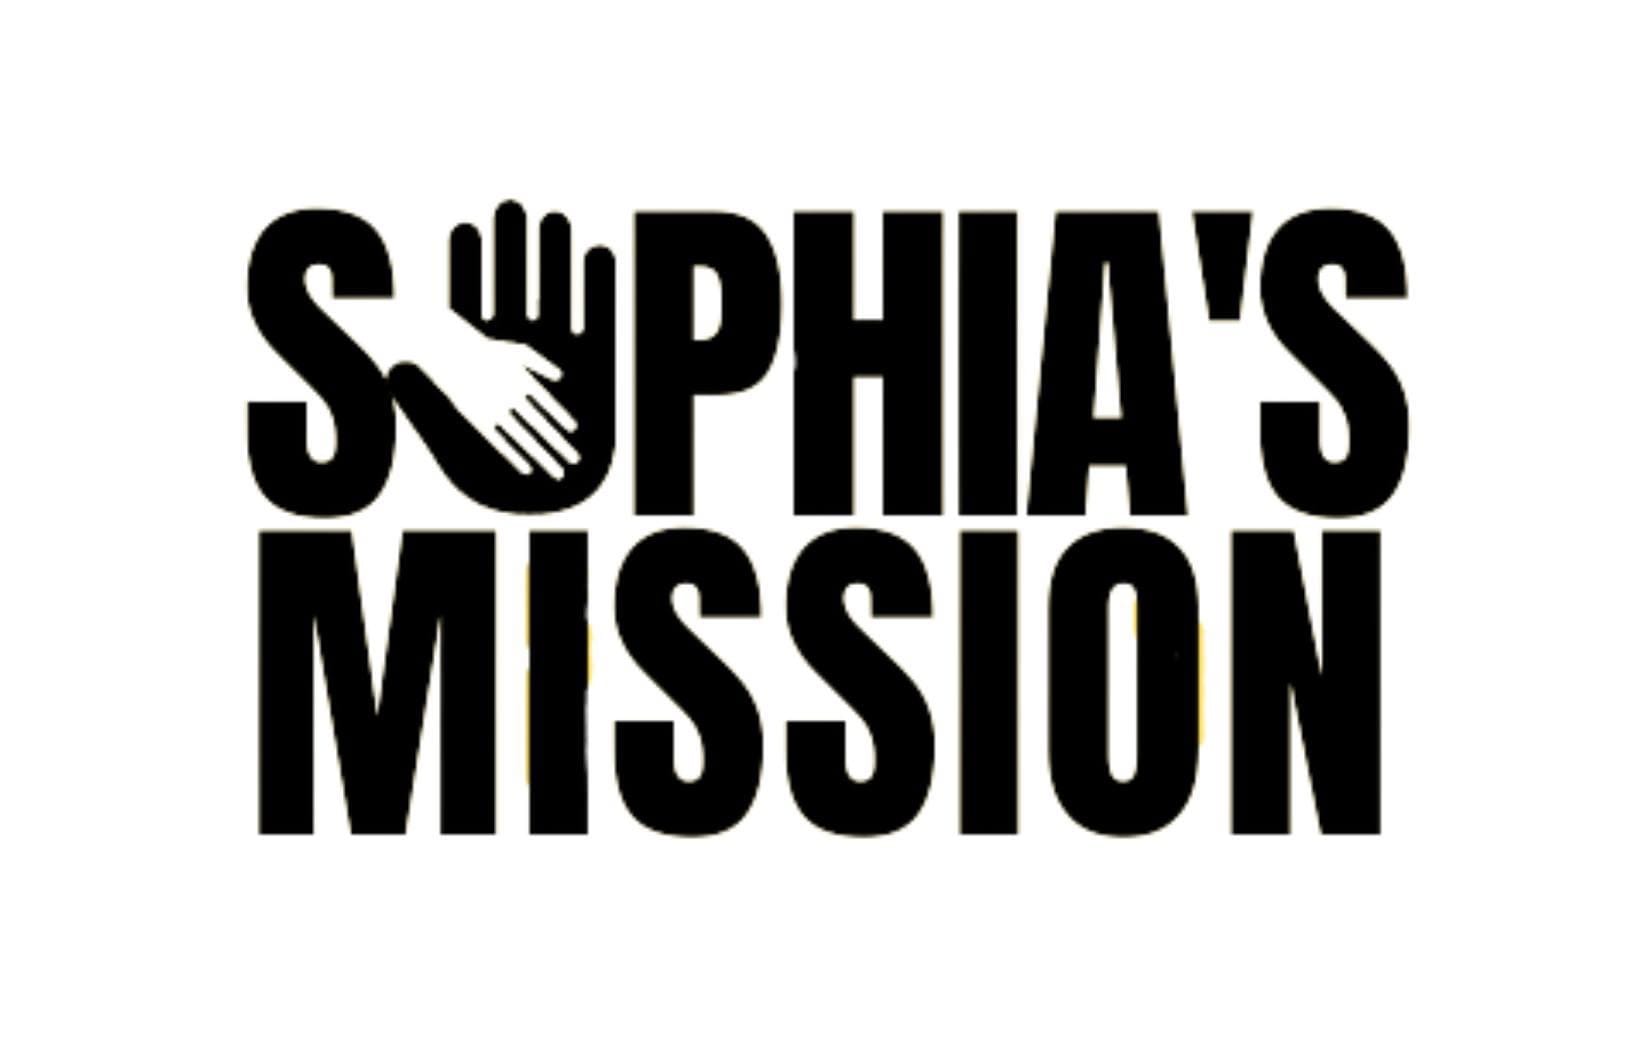 Rock and Roll Hall of Famer Dave Mason to Join Sophia’s Mission as their National Spokesperson